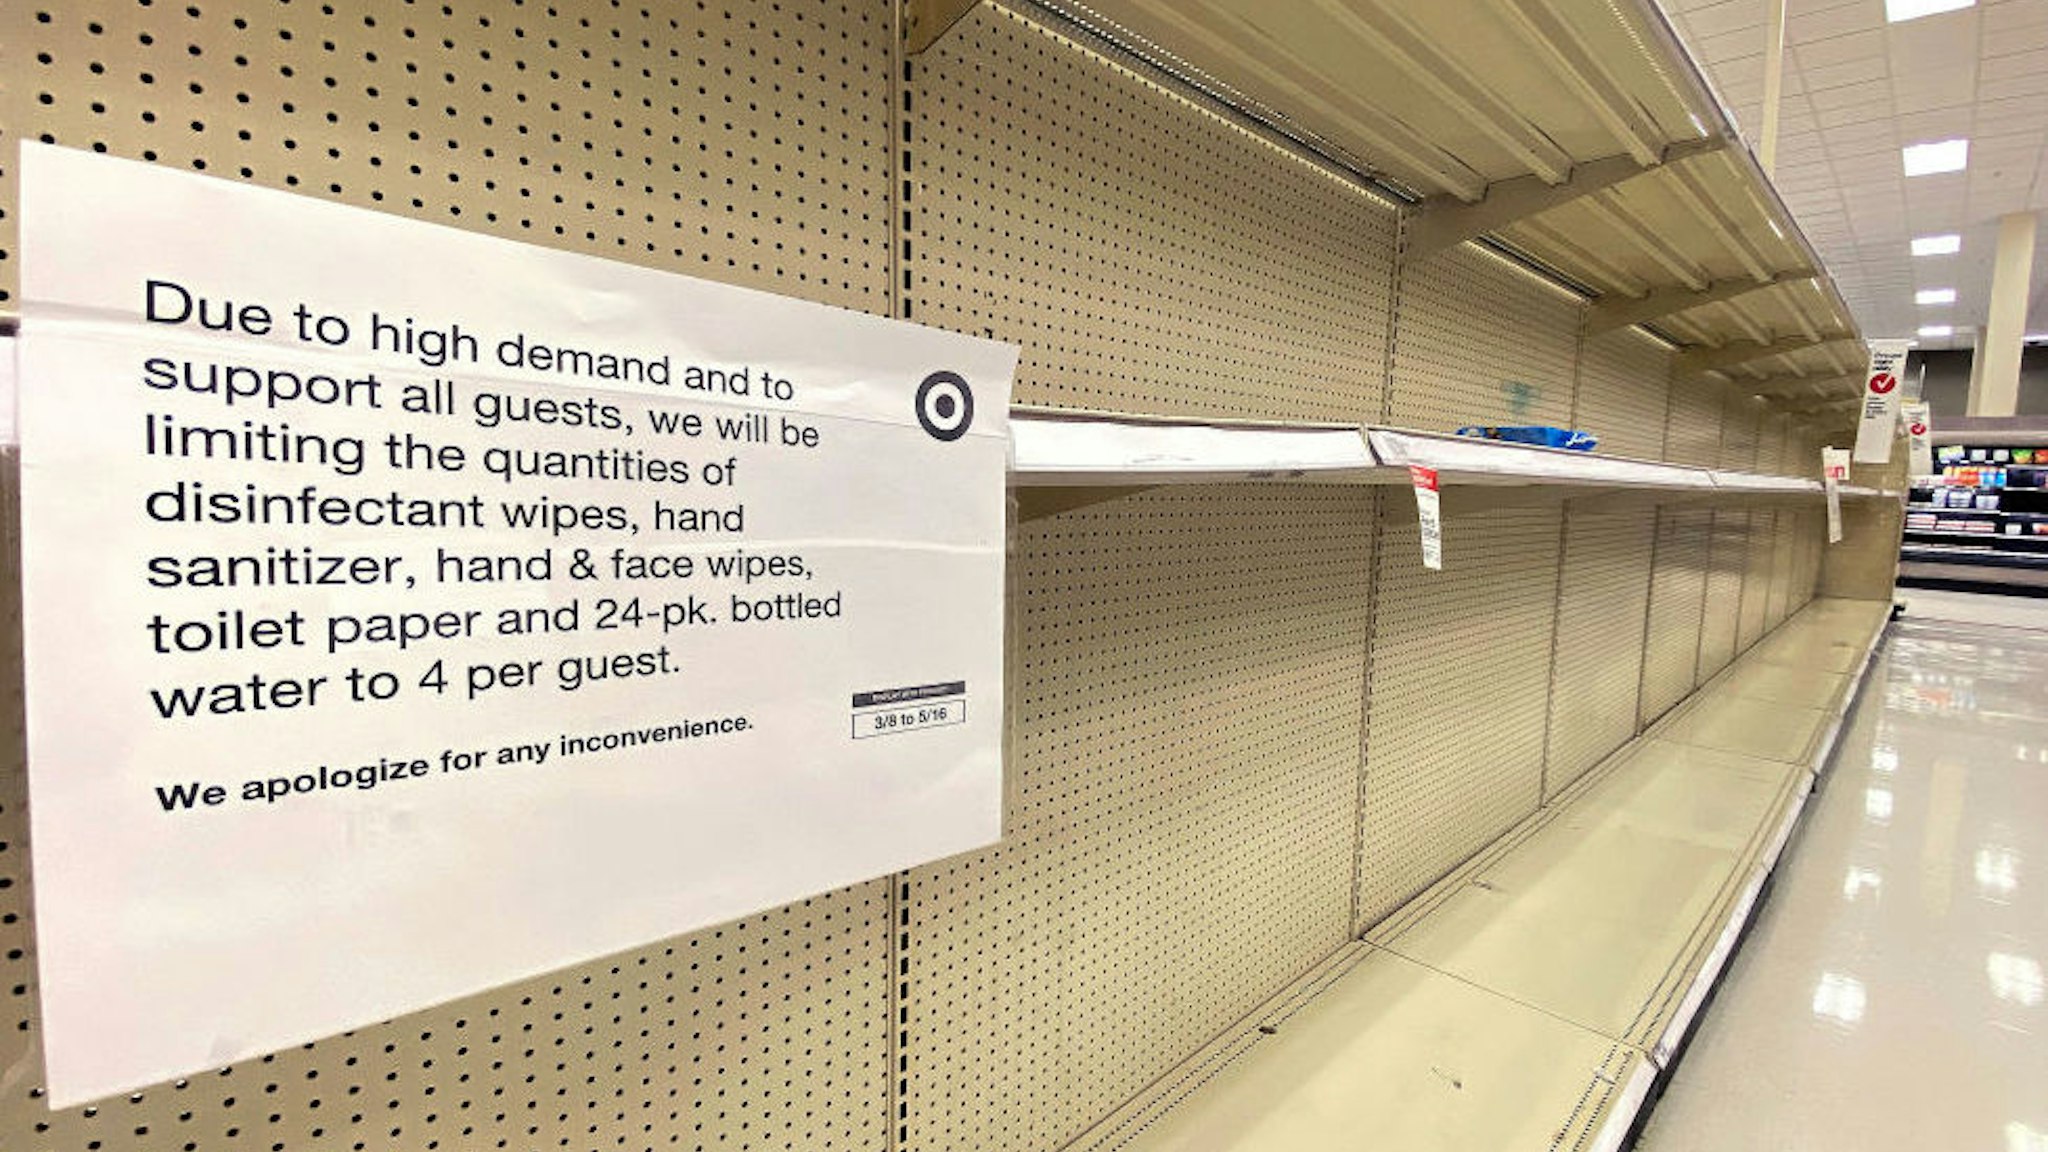 ARLINGTON, VIRGINIA - MARCH 13: Shelves normally stocked with hand wipes, hand sanitizer and toilet paper sit empty at a Target store as people stockpile supplies due to the outbreak of the coronavirus (COVID-19) March 13, 2020 in Arlington, Virginia. The U.S. government is racing to make more coronavirus test kits available as schools close around the country, sporting events are canceled, and businesses encourage workers to telecommute where possible.